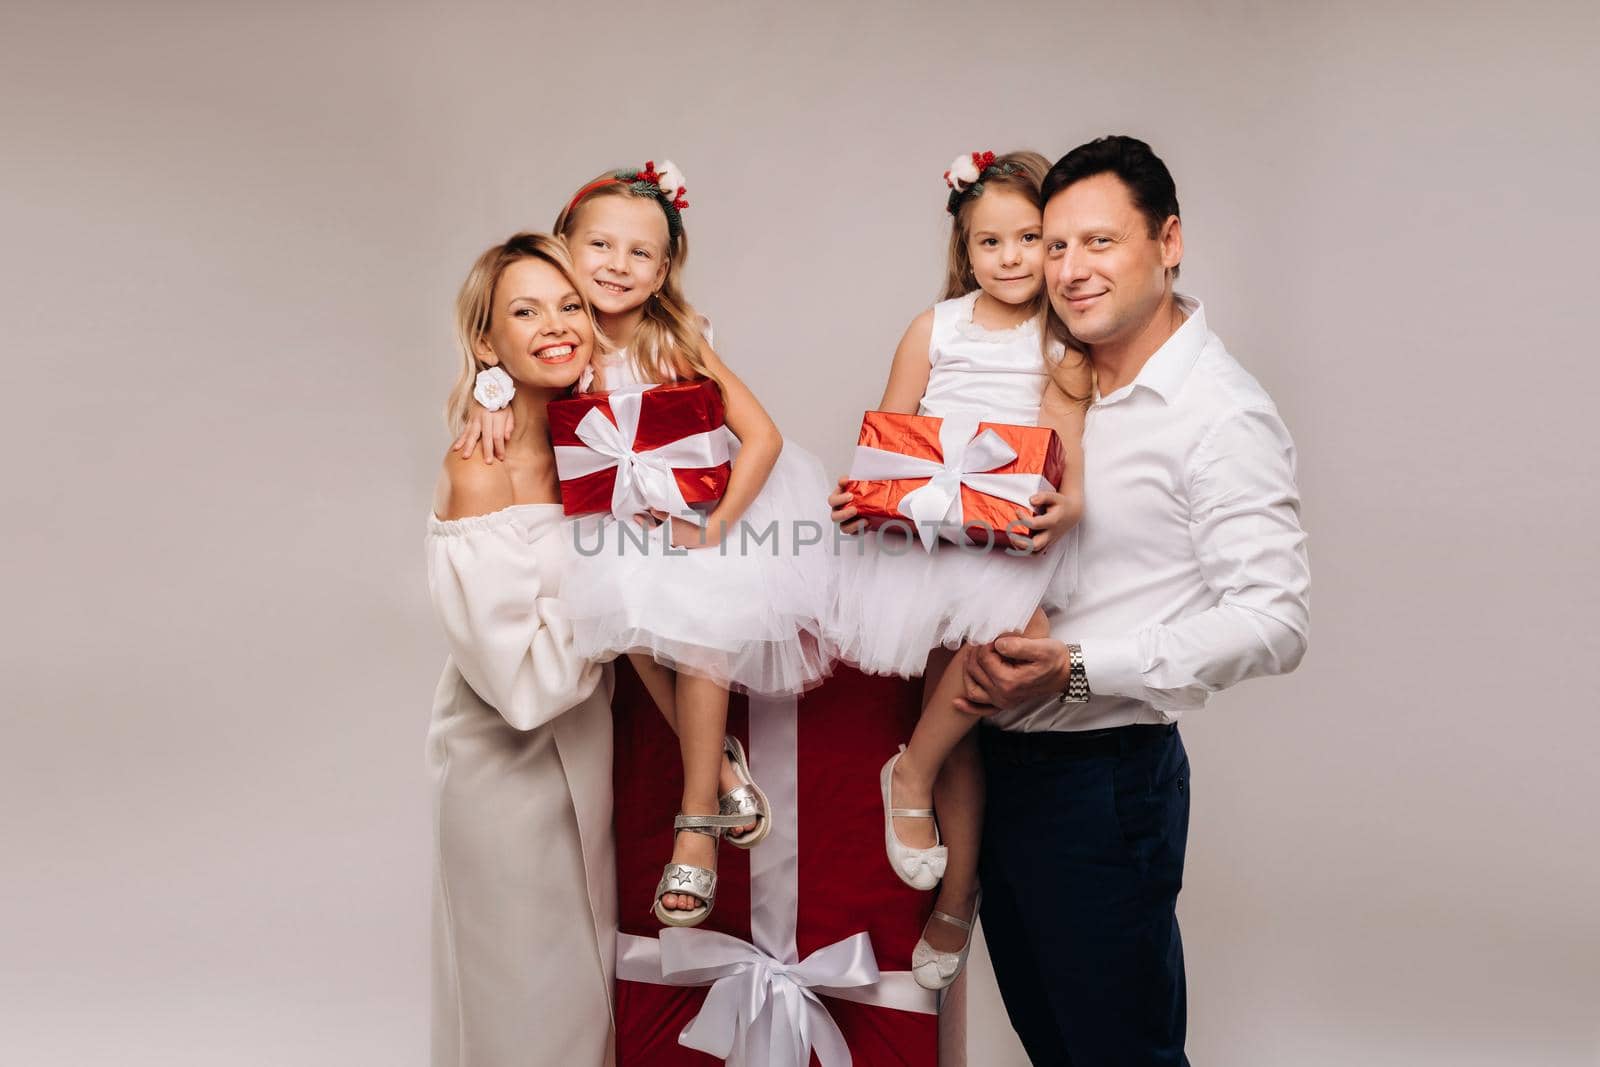 Portrait of a happy family with gifts in their hands on a beige background.